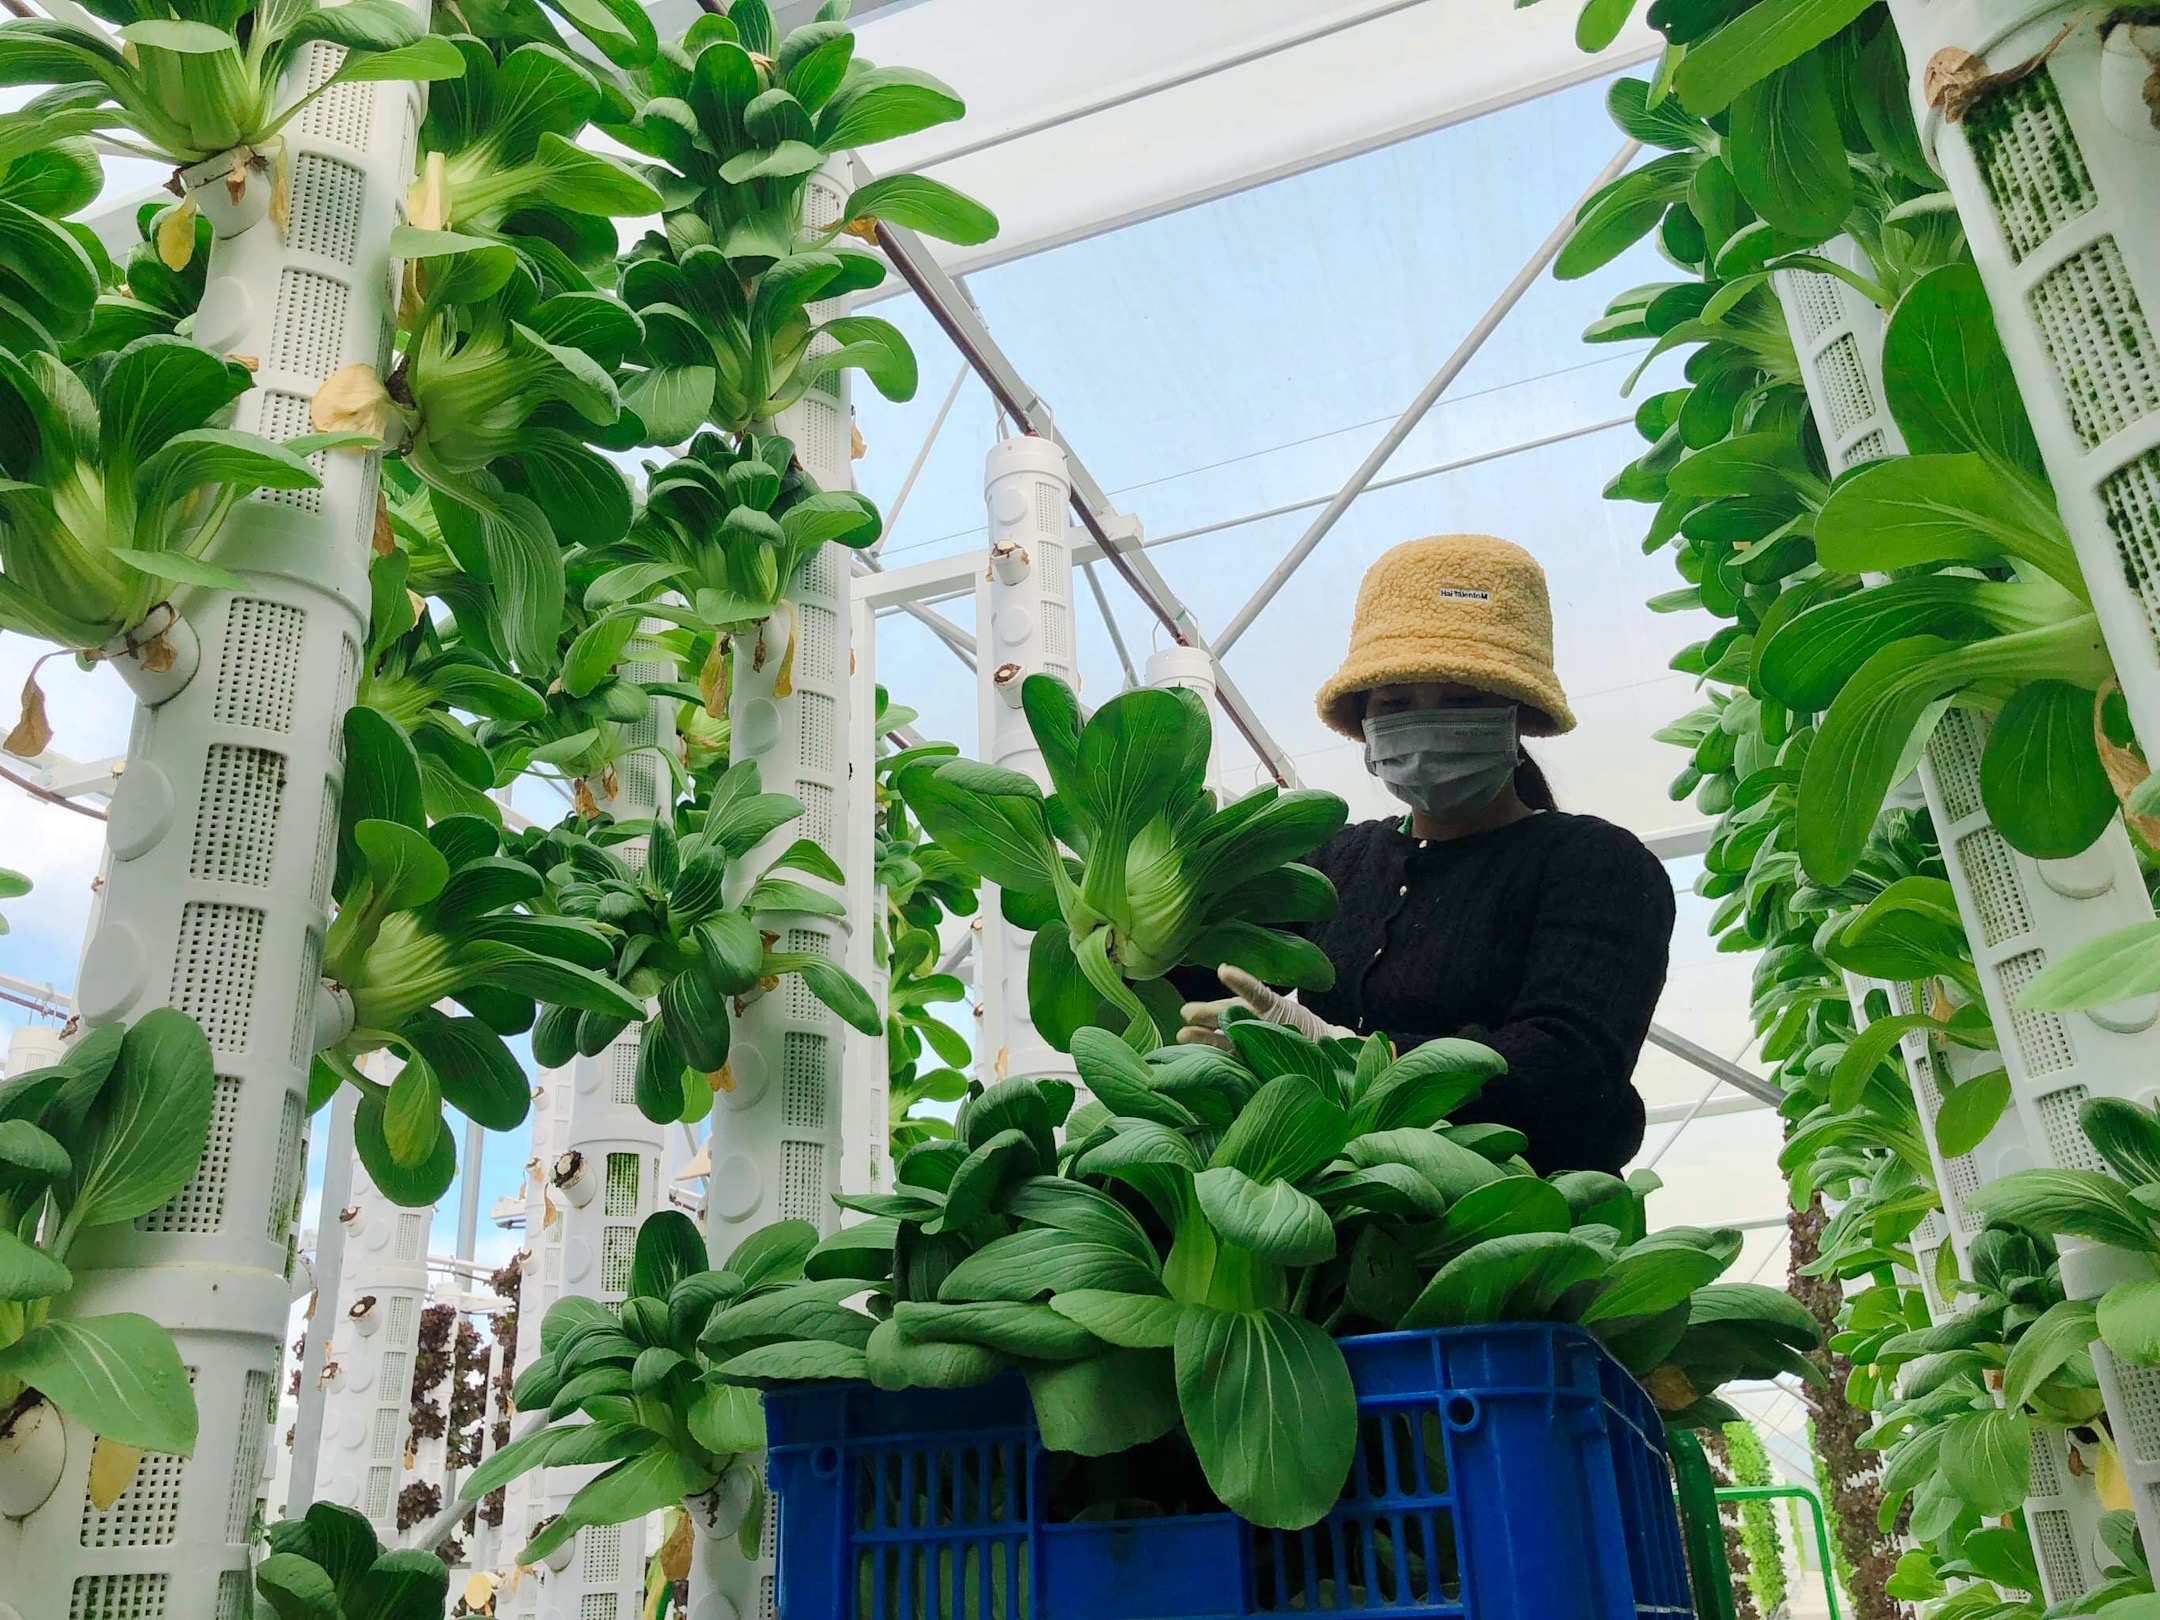 The plants are grown in the vertical system, with 20 plants grown in each two-meter tall pod. Photo: Hong Van  / Tuoi Tre